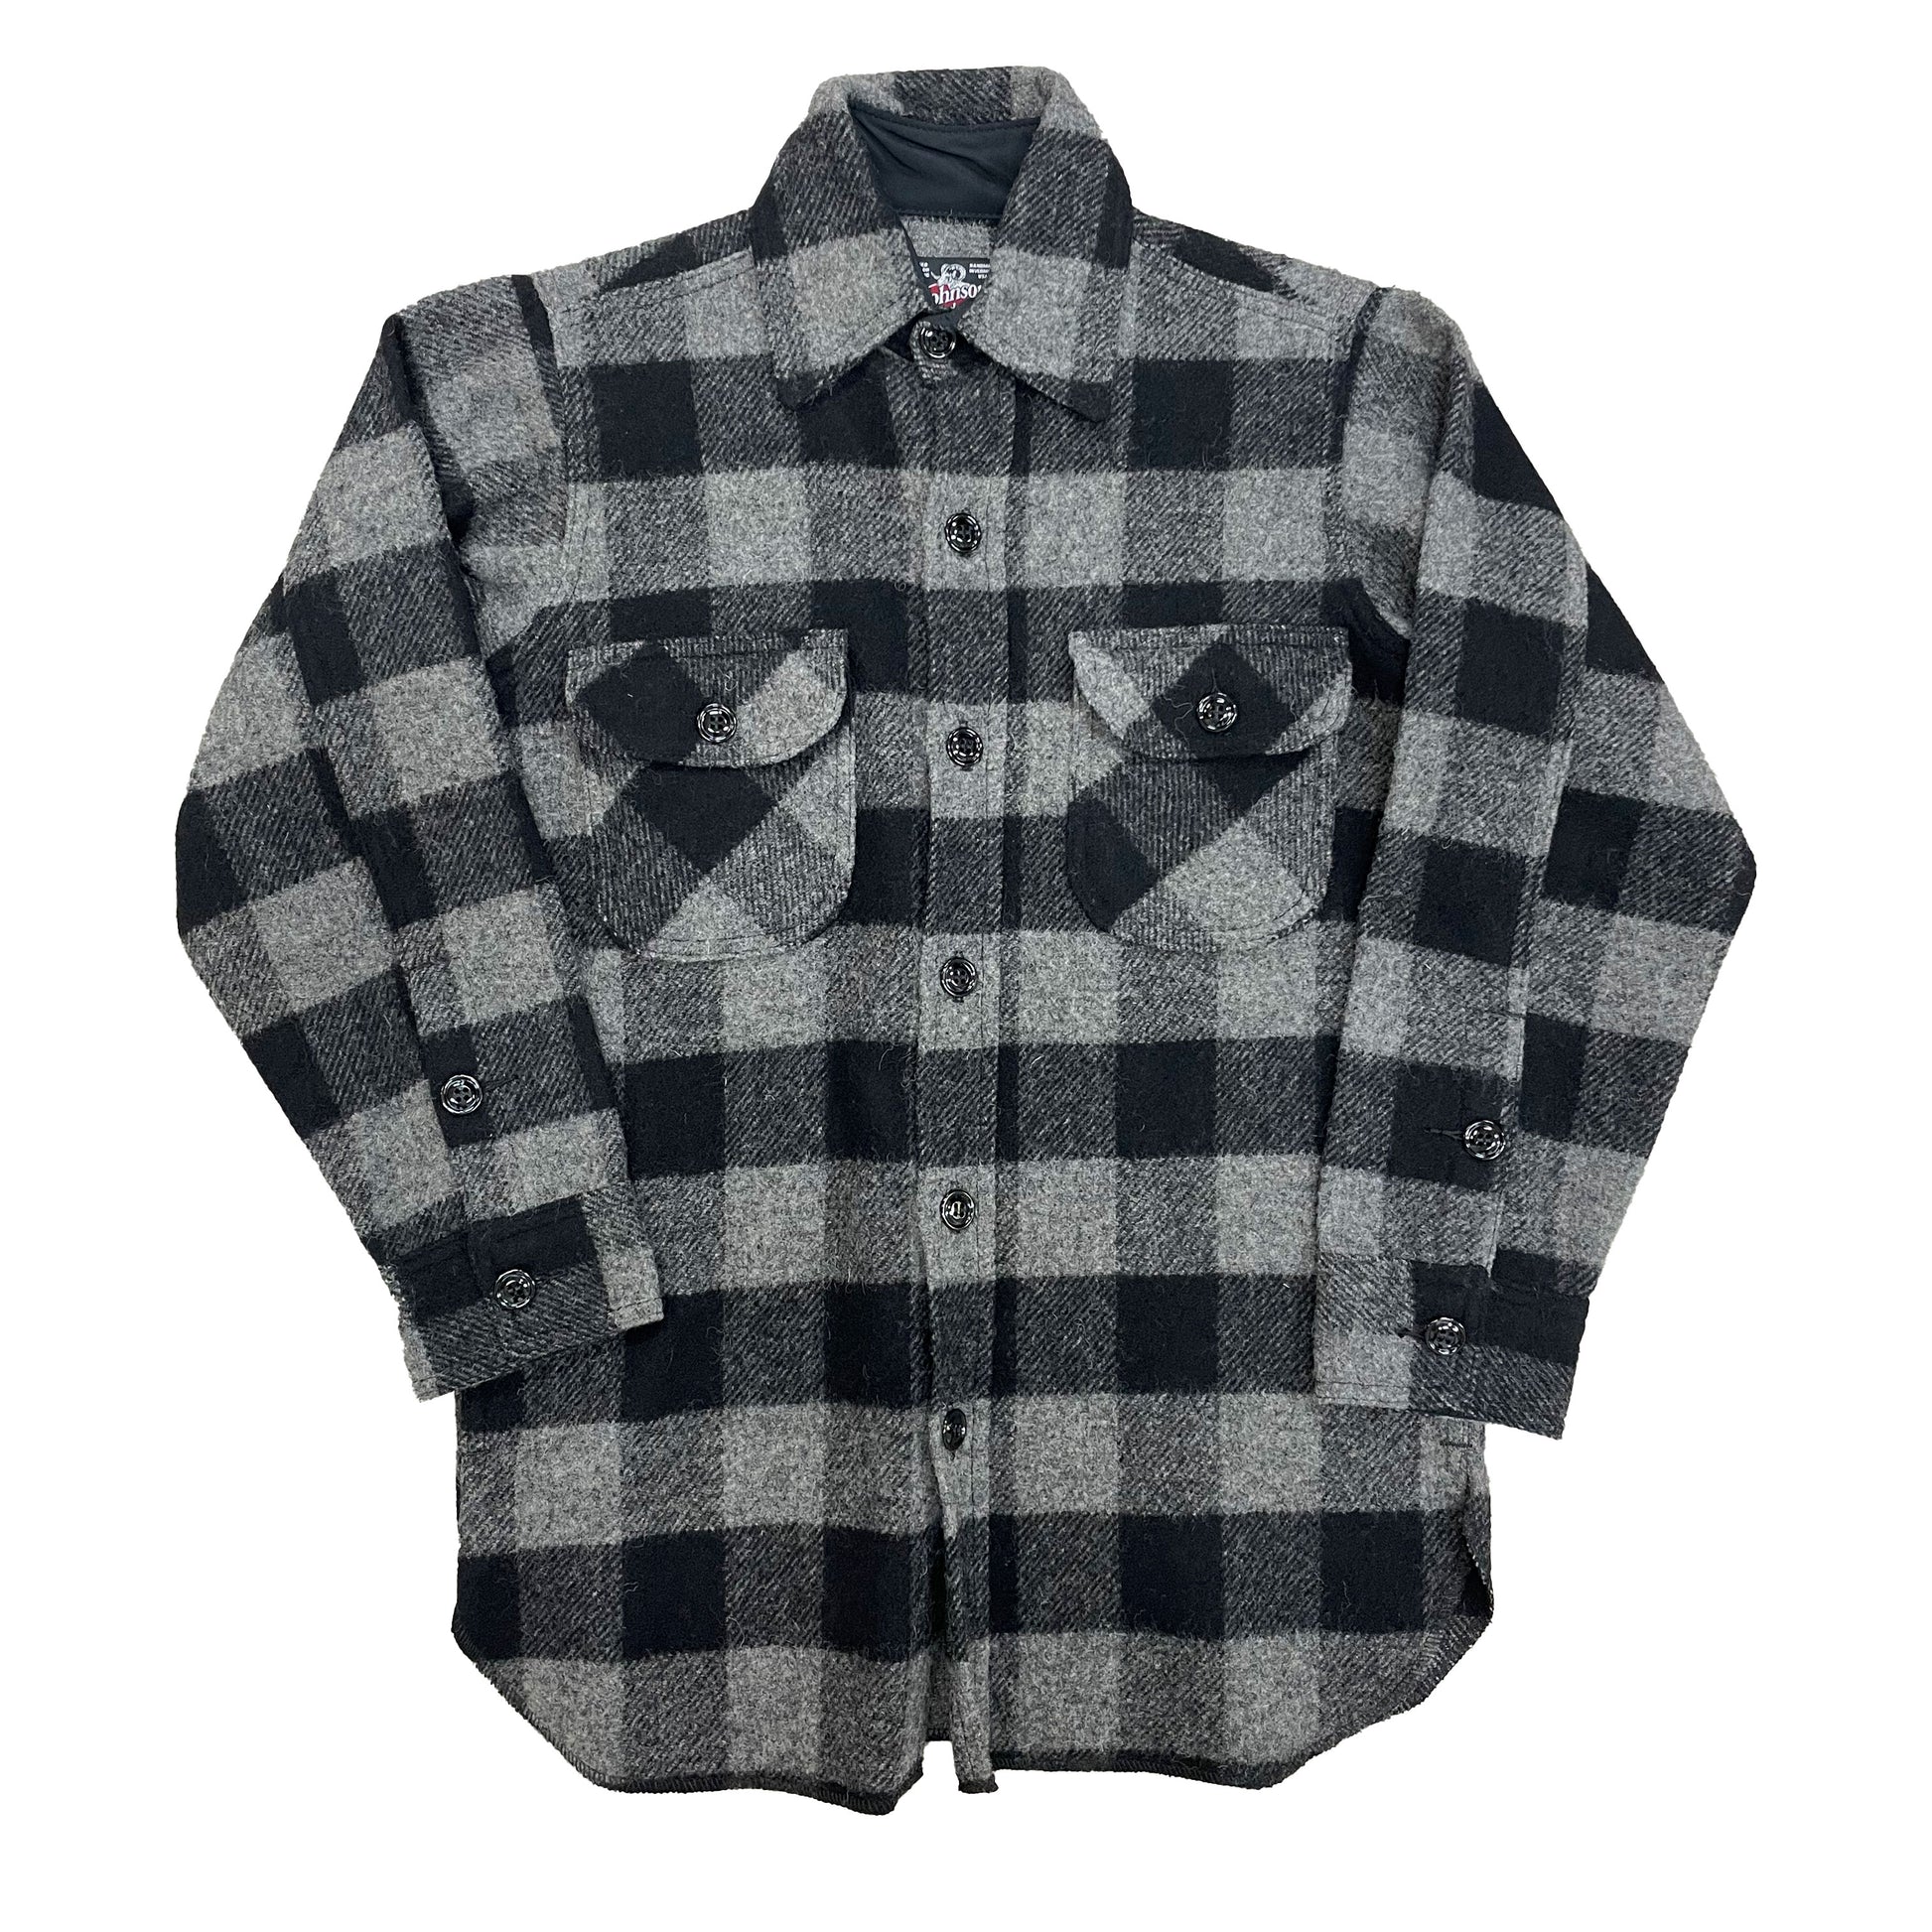 Long Tail Button Down long sleeve wool shirt with a 6 button front, button cuffs and two front chest pockets. Shown in gray and black 2 inch buffalo plaid.